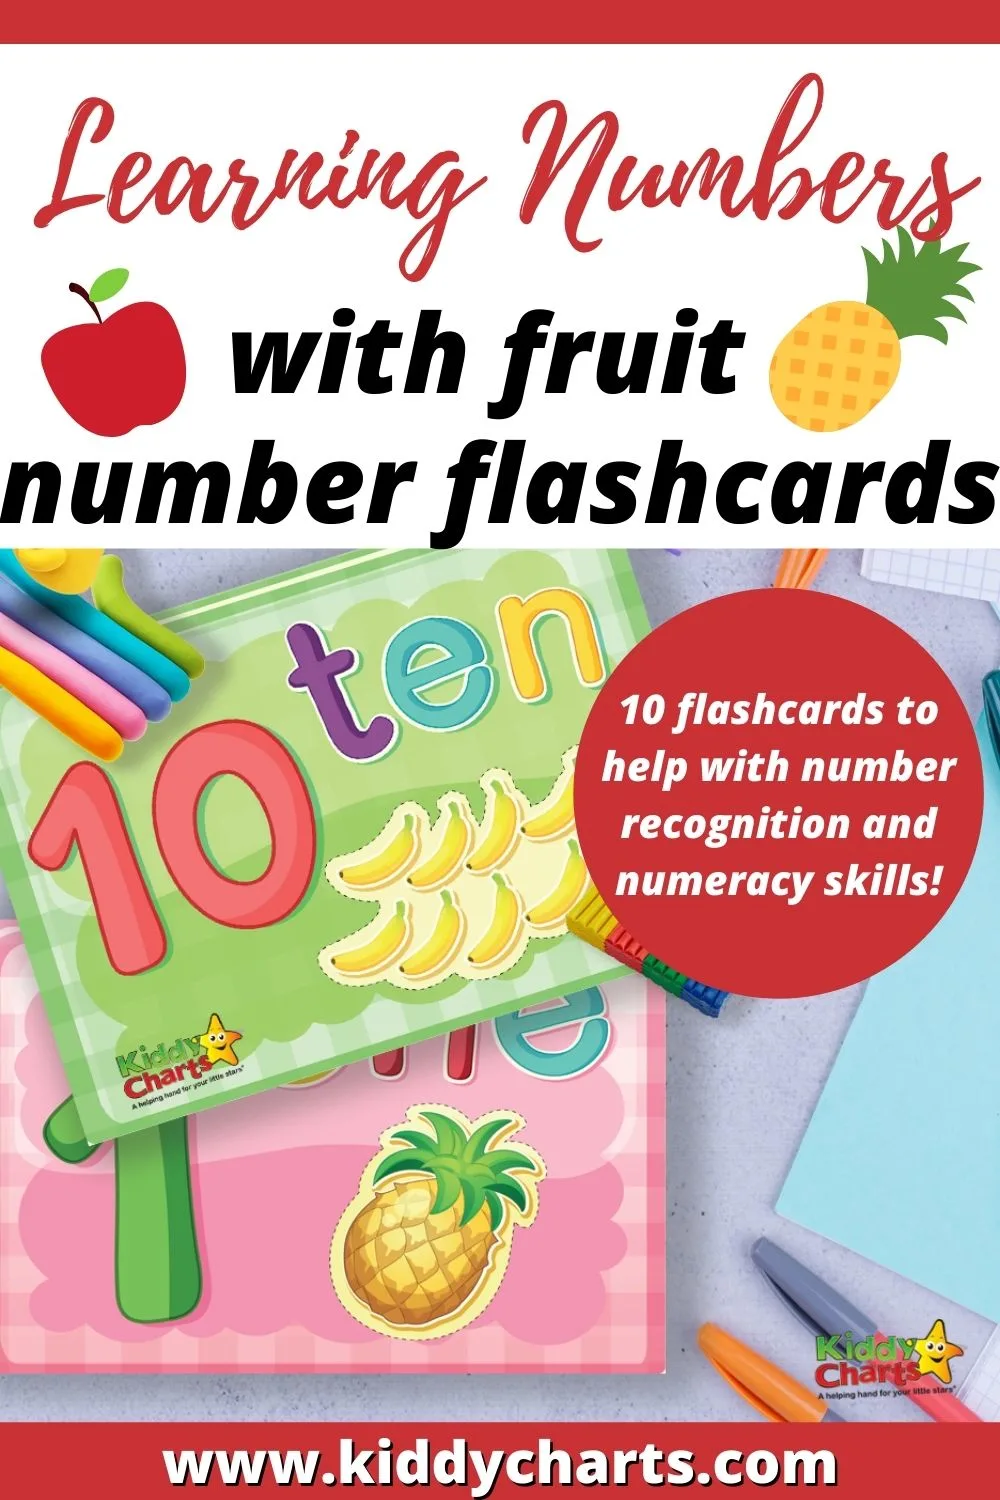 Learning Numbers with Fruit Number Flashcards